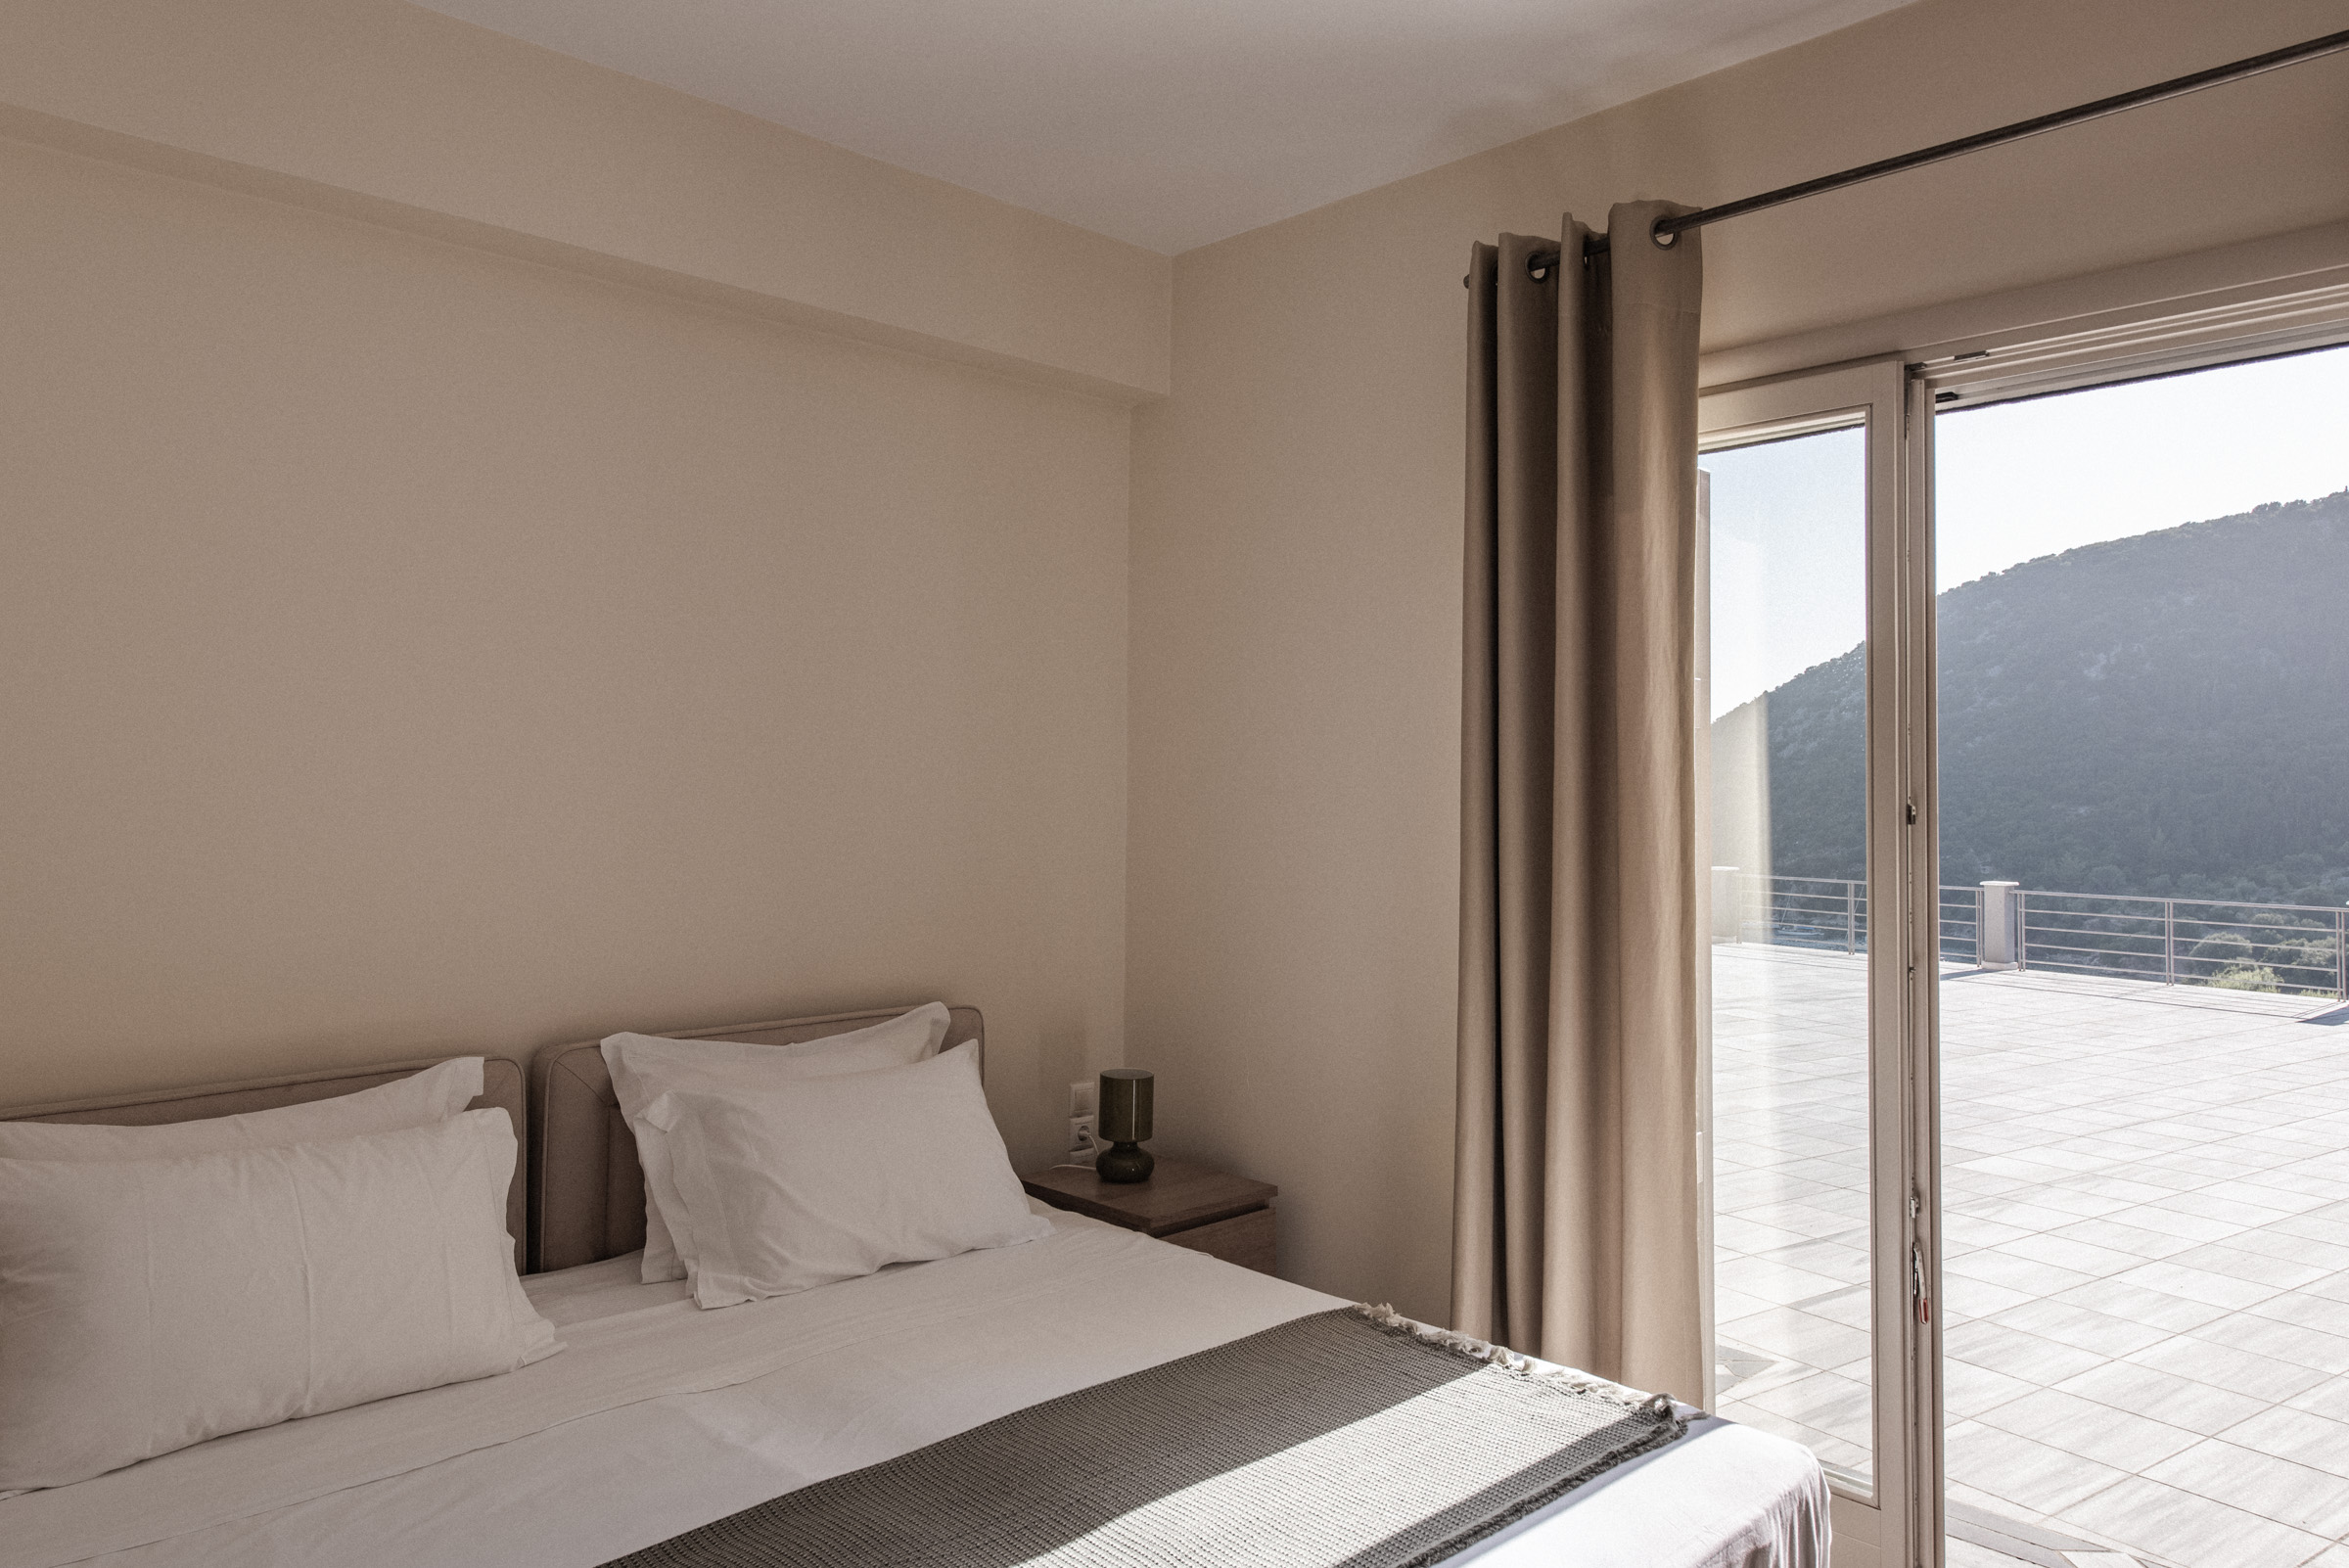 Bedroom of villa for rent on Ithaca Greece, Stavros